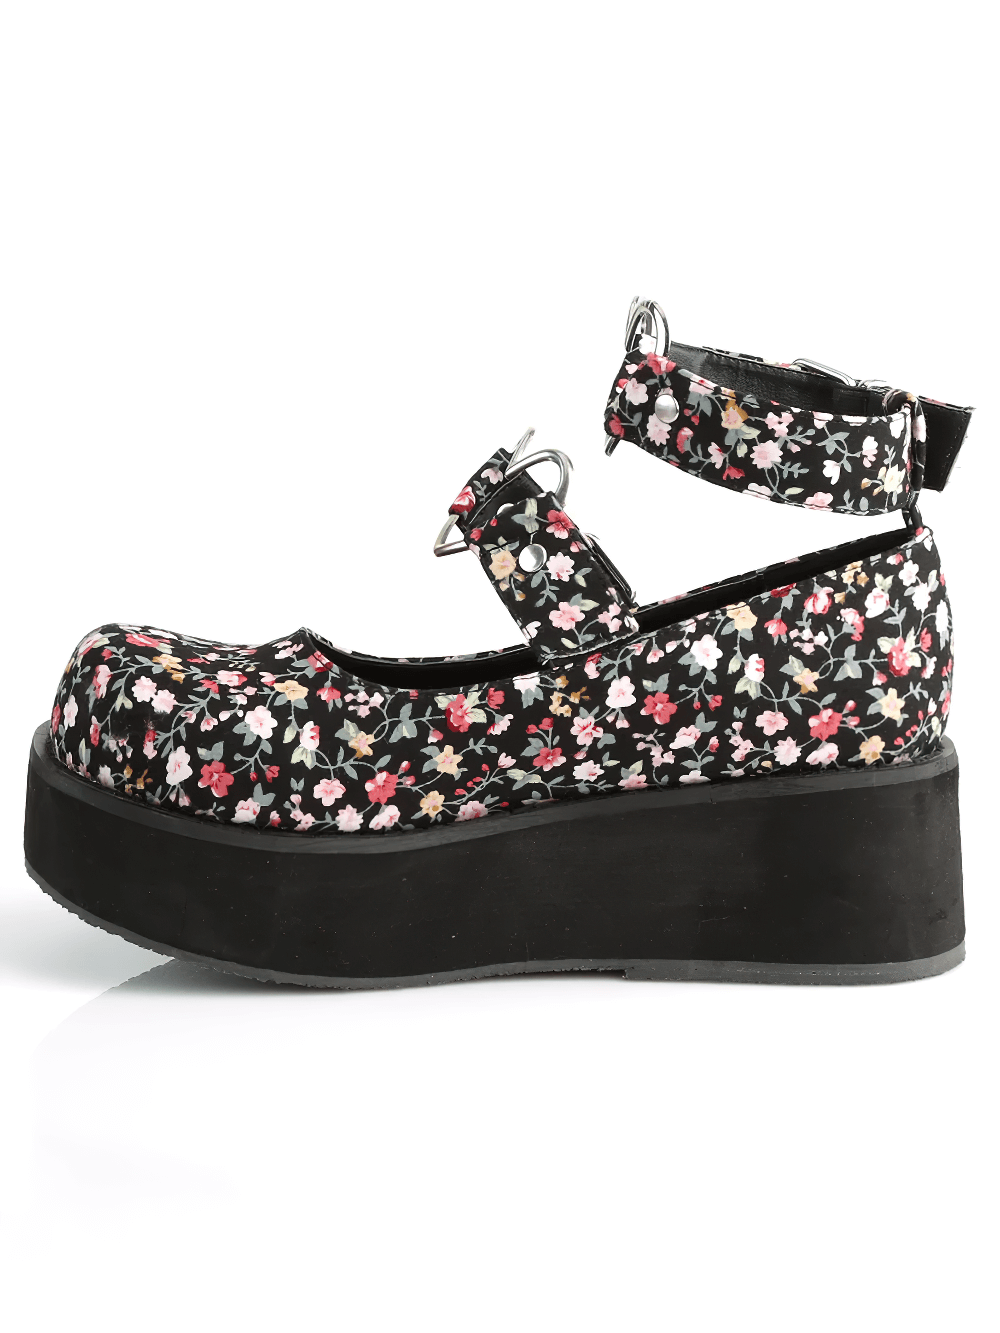 DEMONIA Floral Mary Jane Platforms with Heart Detail